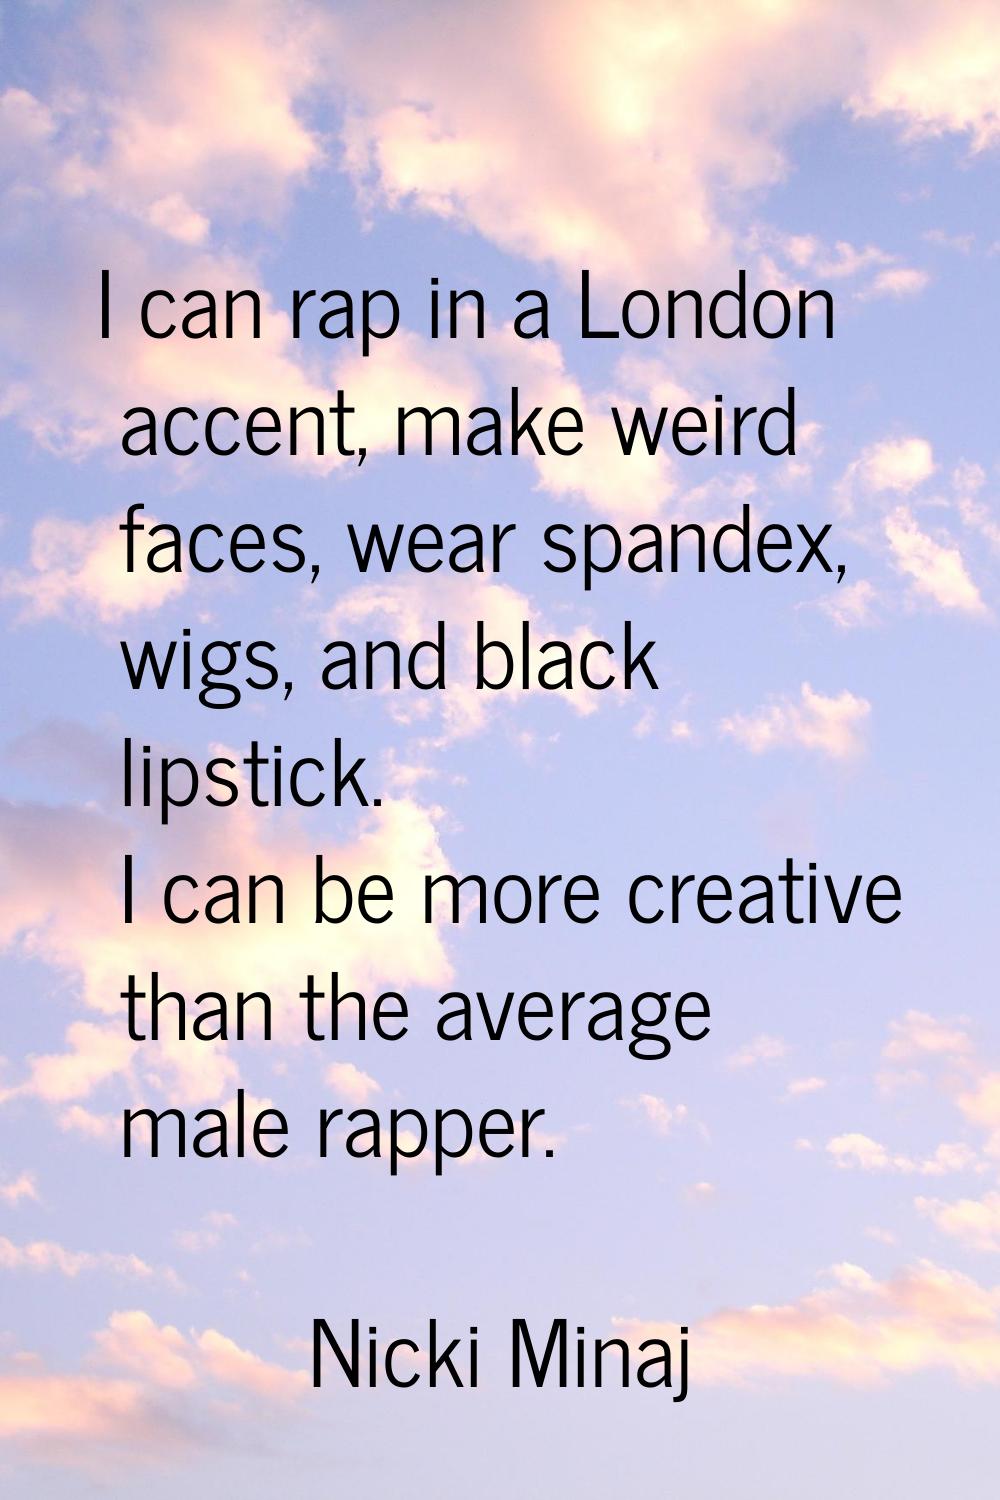 I can rap in a London accent, make weird faces, wear spandex, wigs, and black lipstick. I can be mo